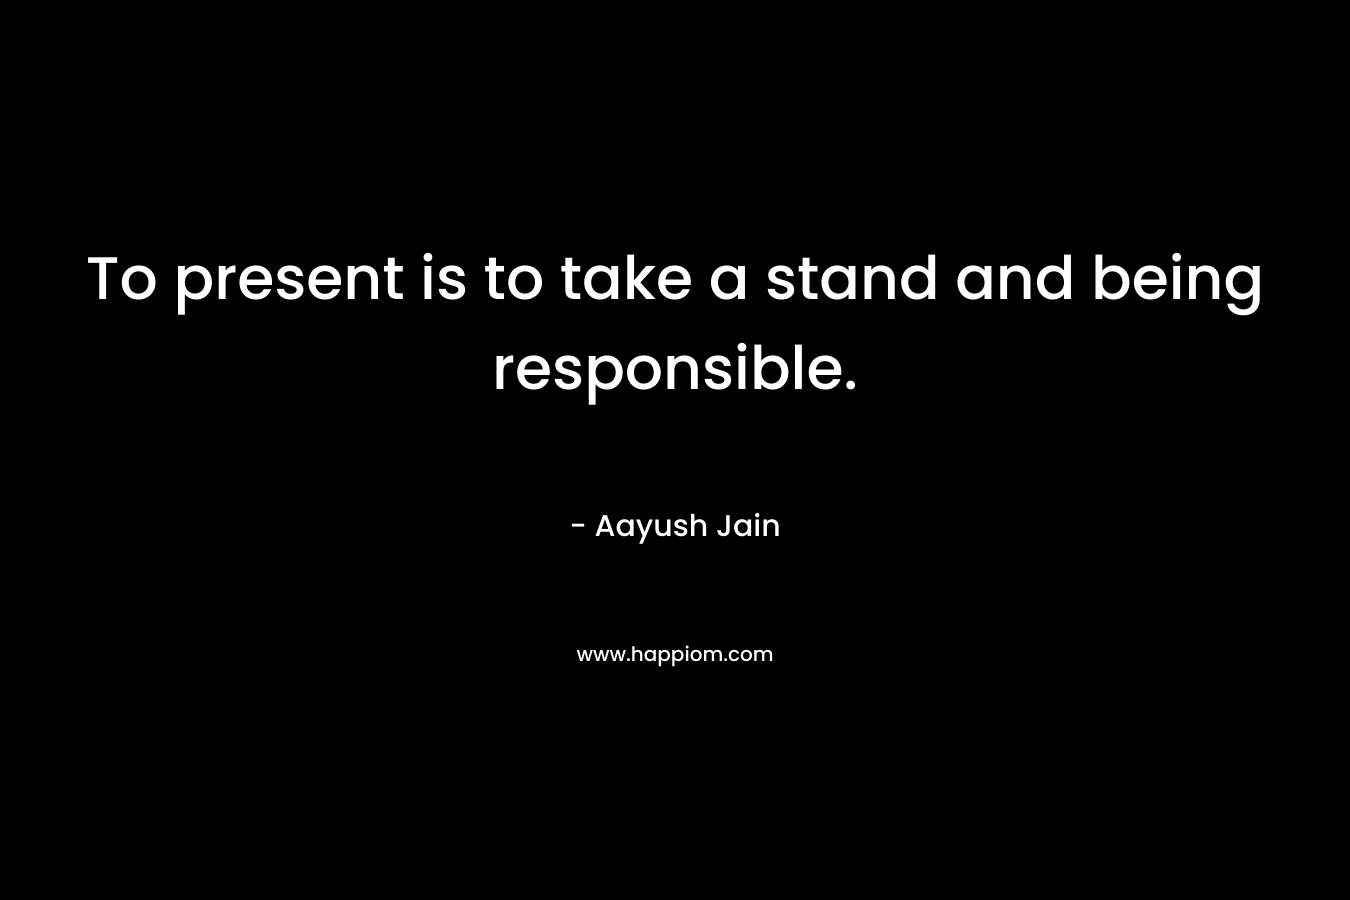 To present is to take a stand and being responsible. – Aayush Jain